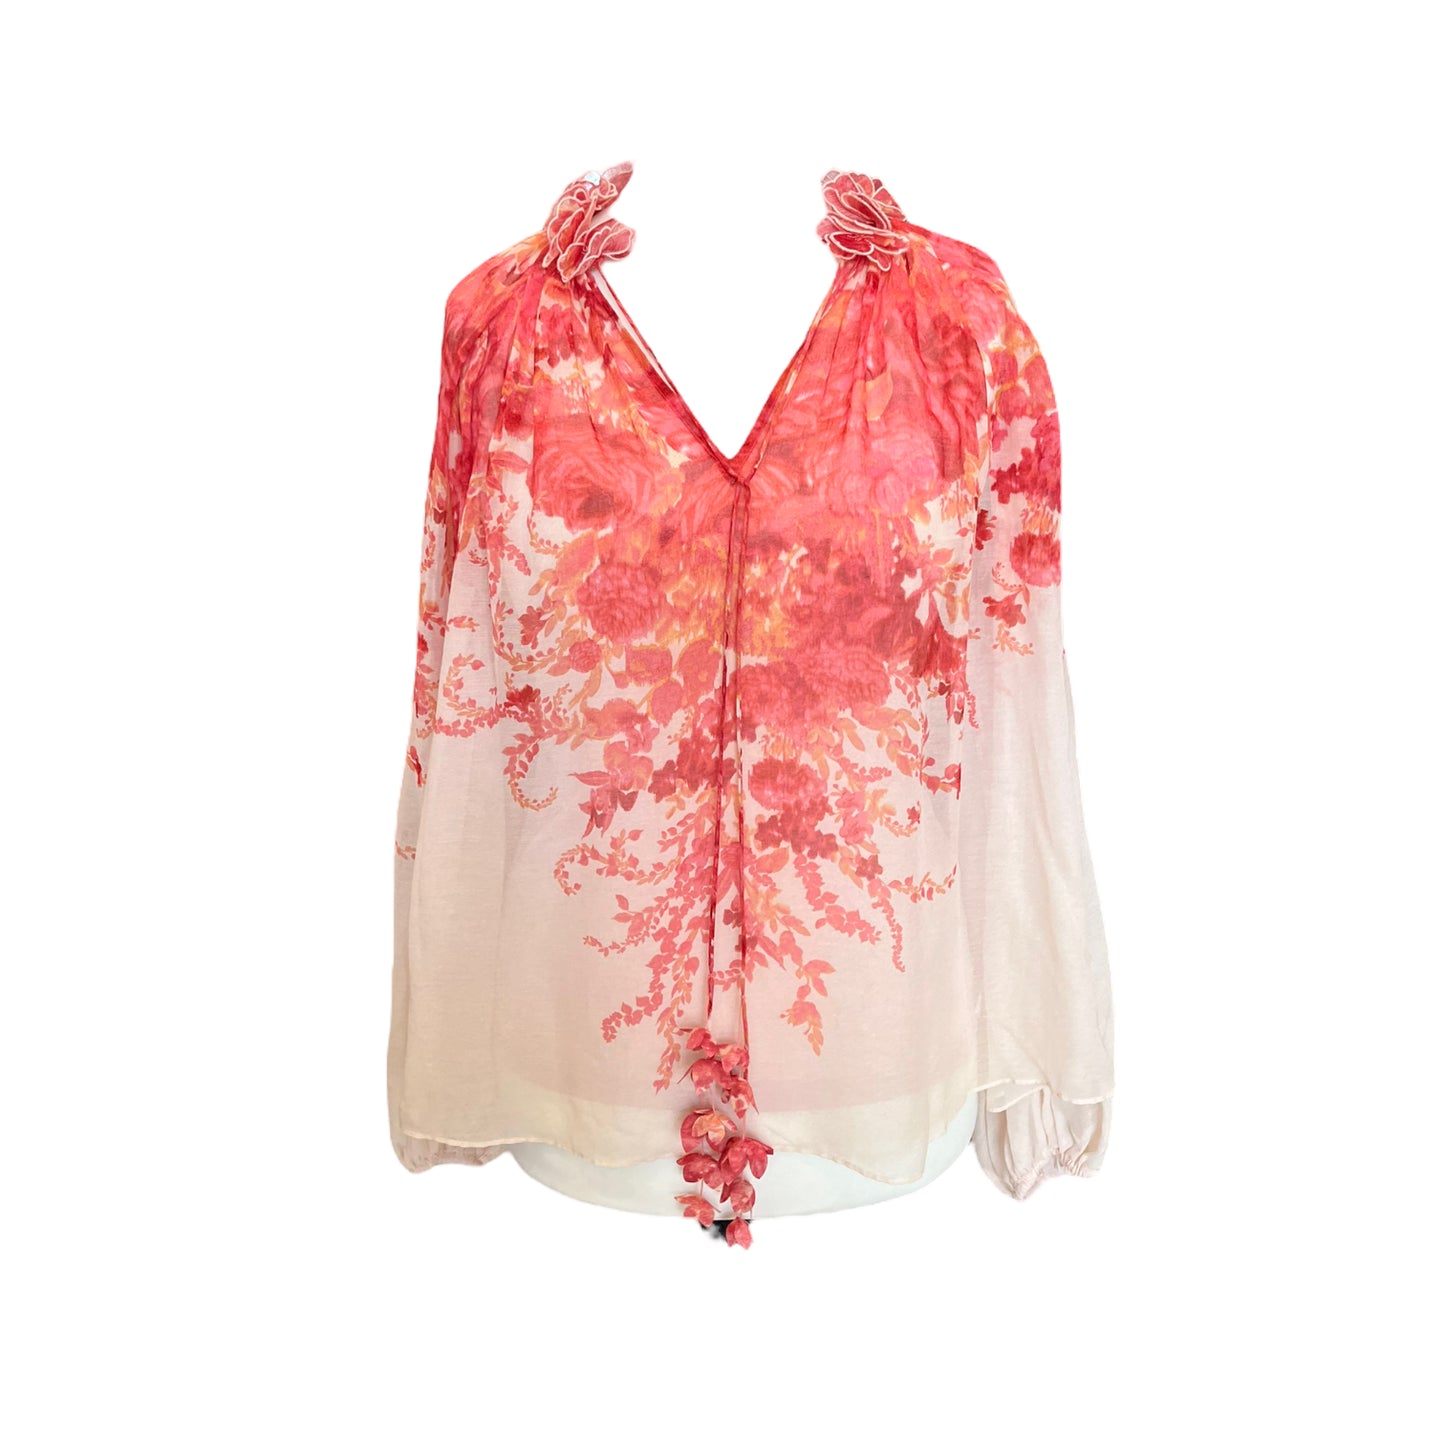 NEW Zimmerman Pink Floral Top